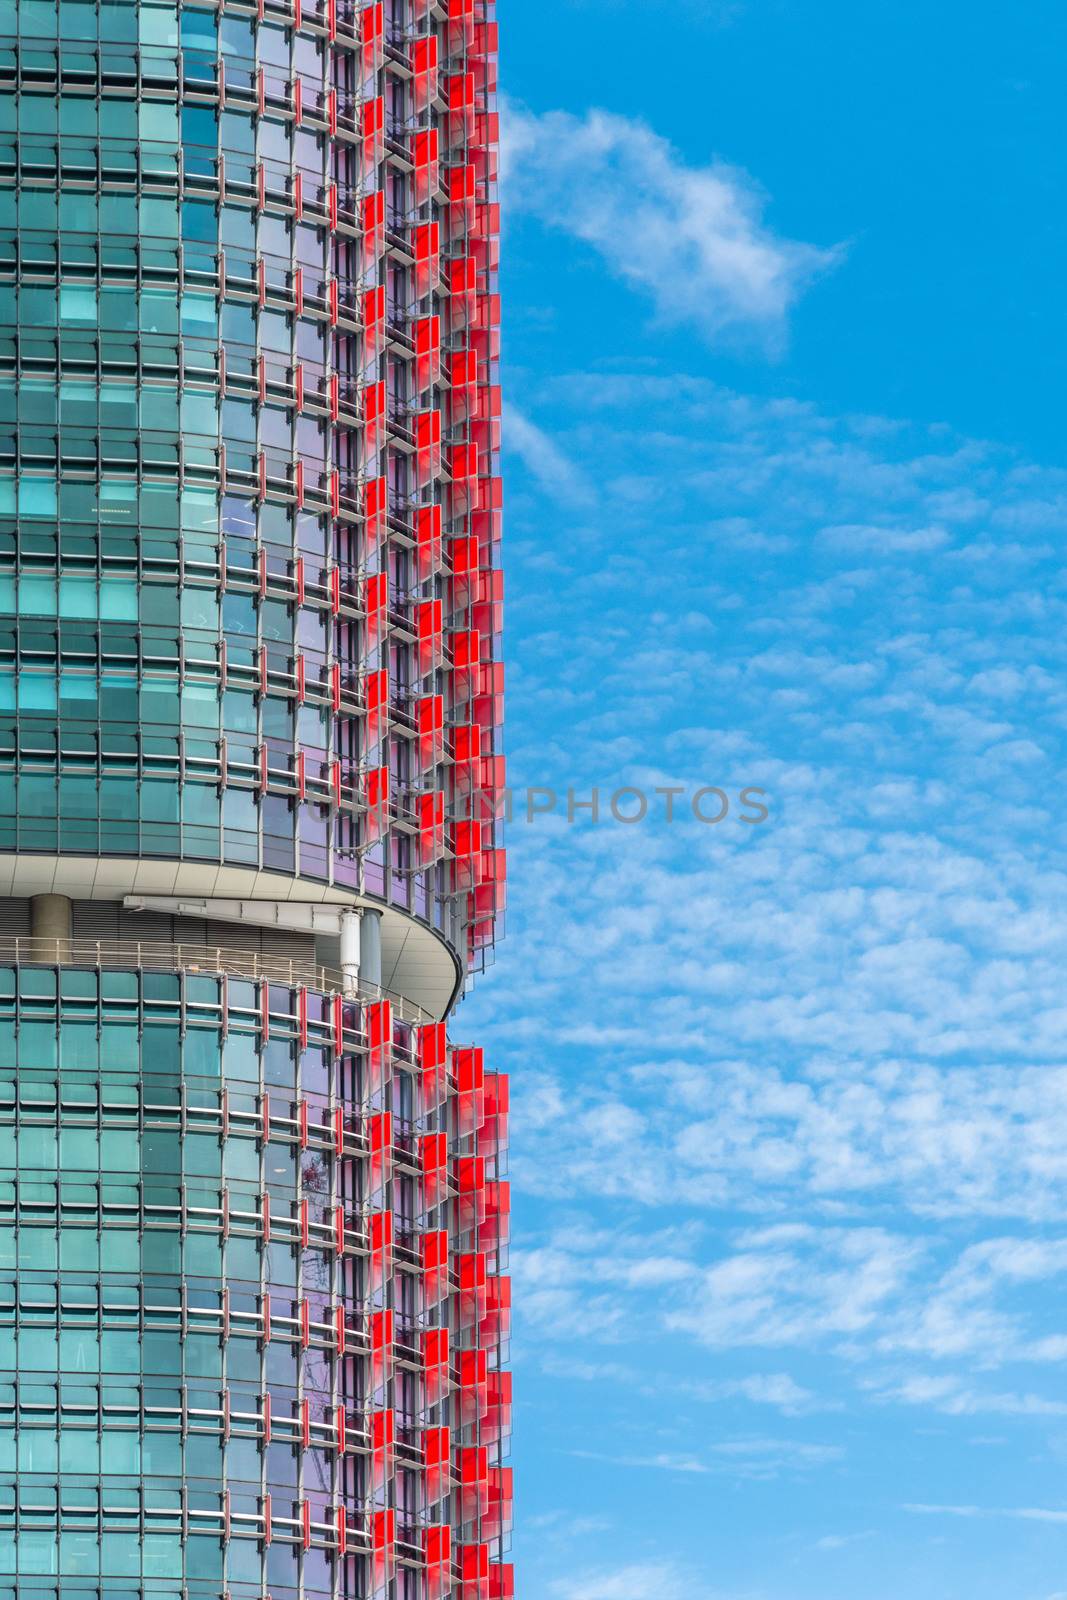 Close up of the International Towers in Sydney against a blue sky by mauricallari